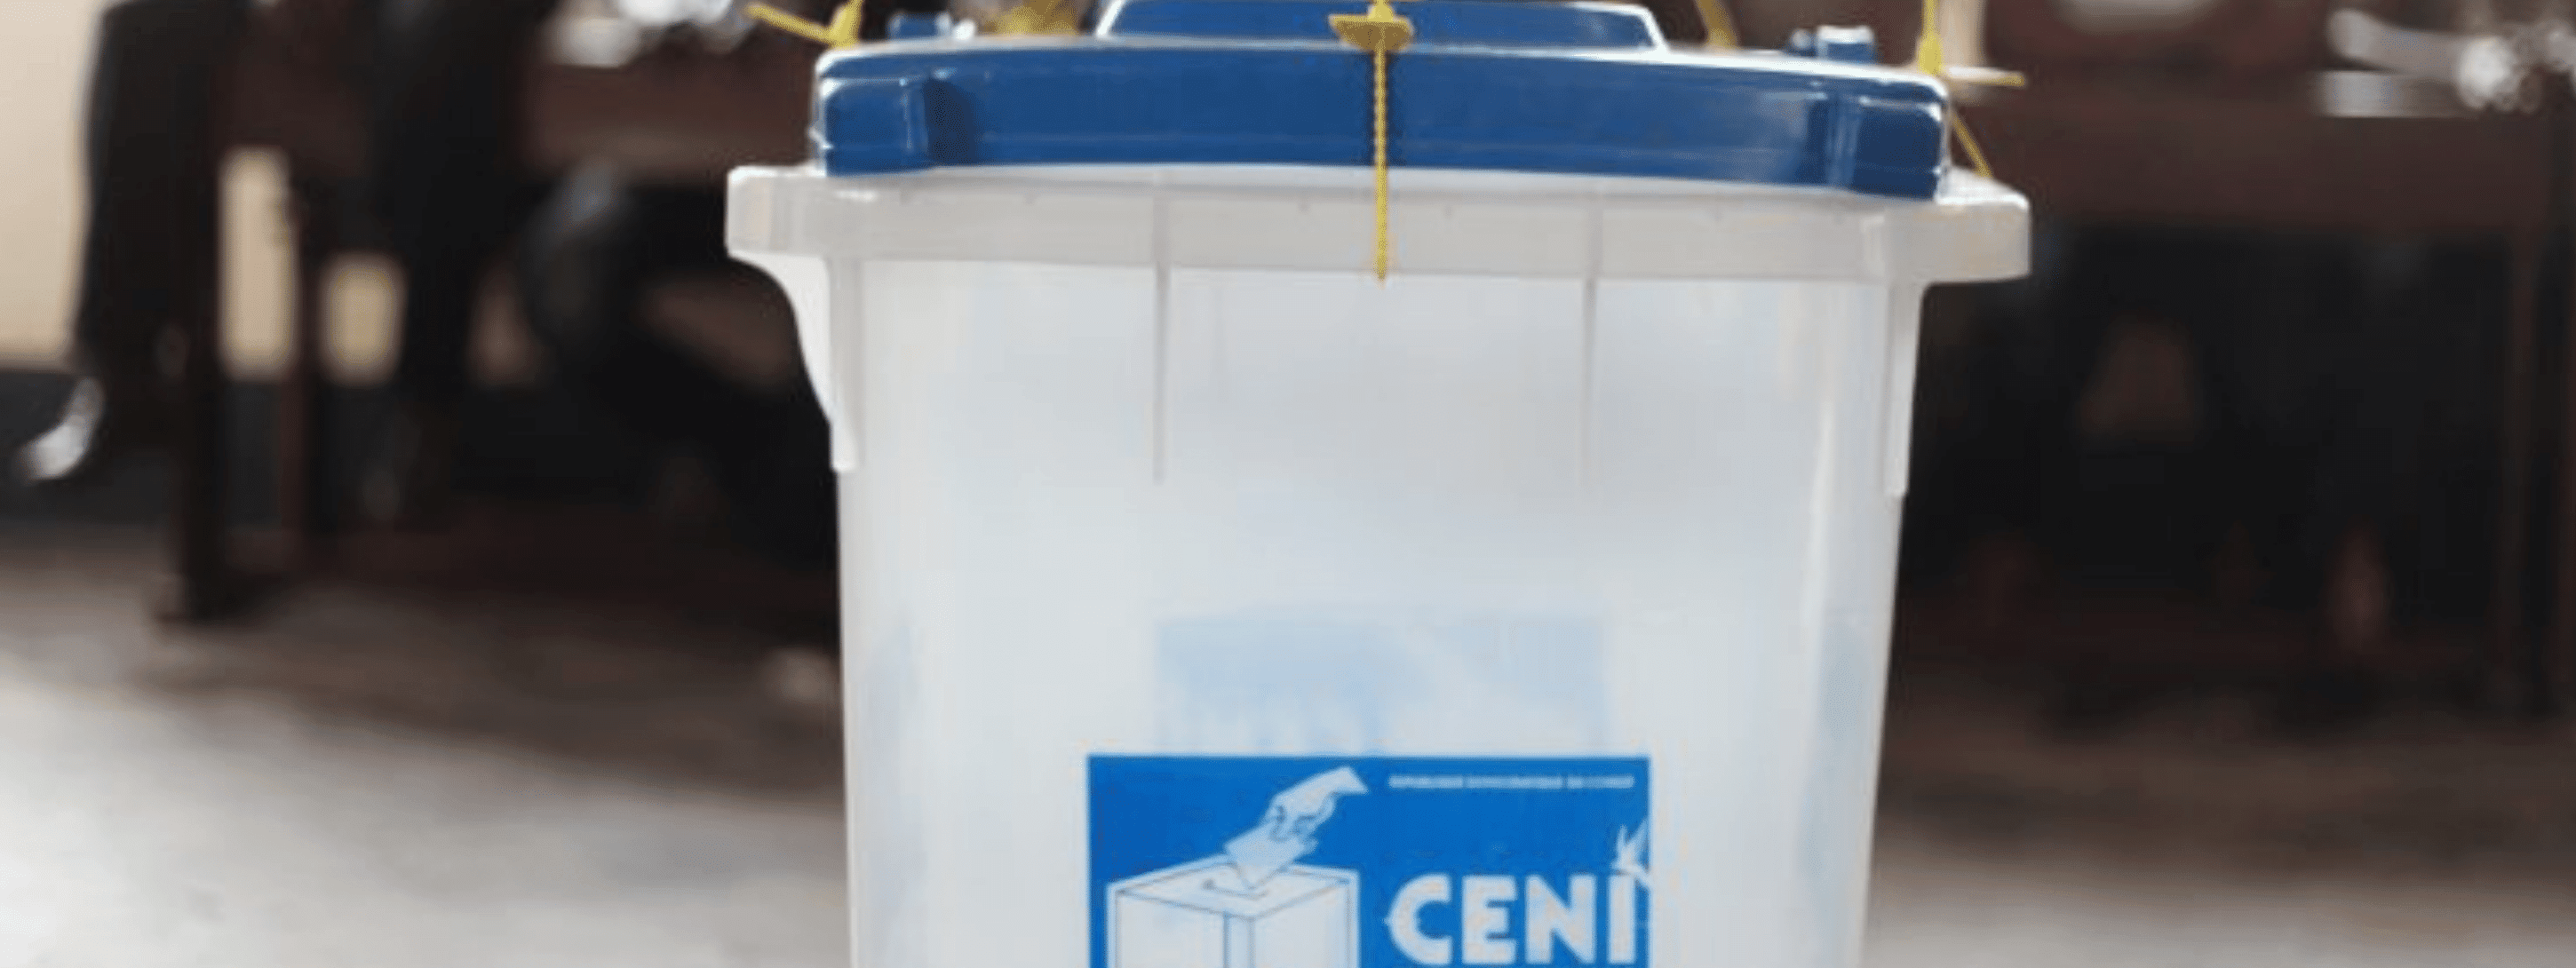 a bucket with a ceni logo on it